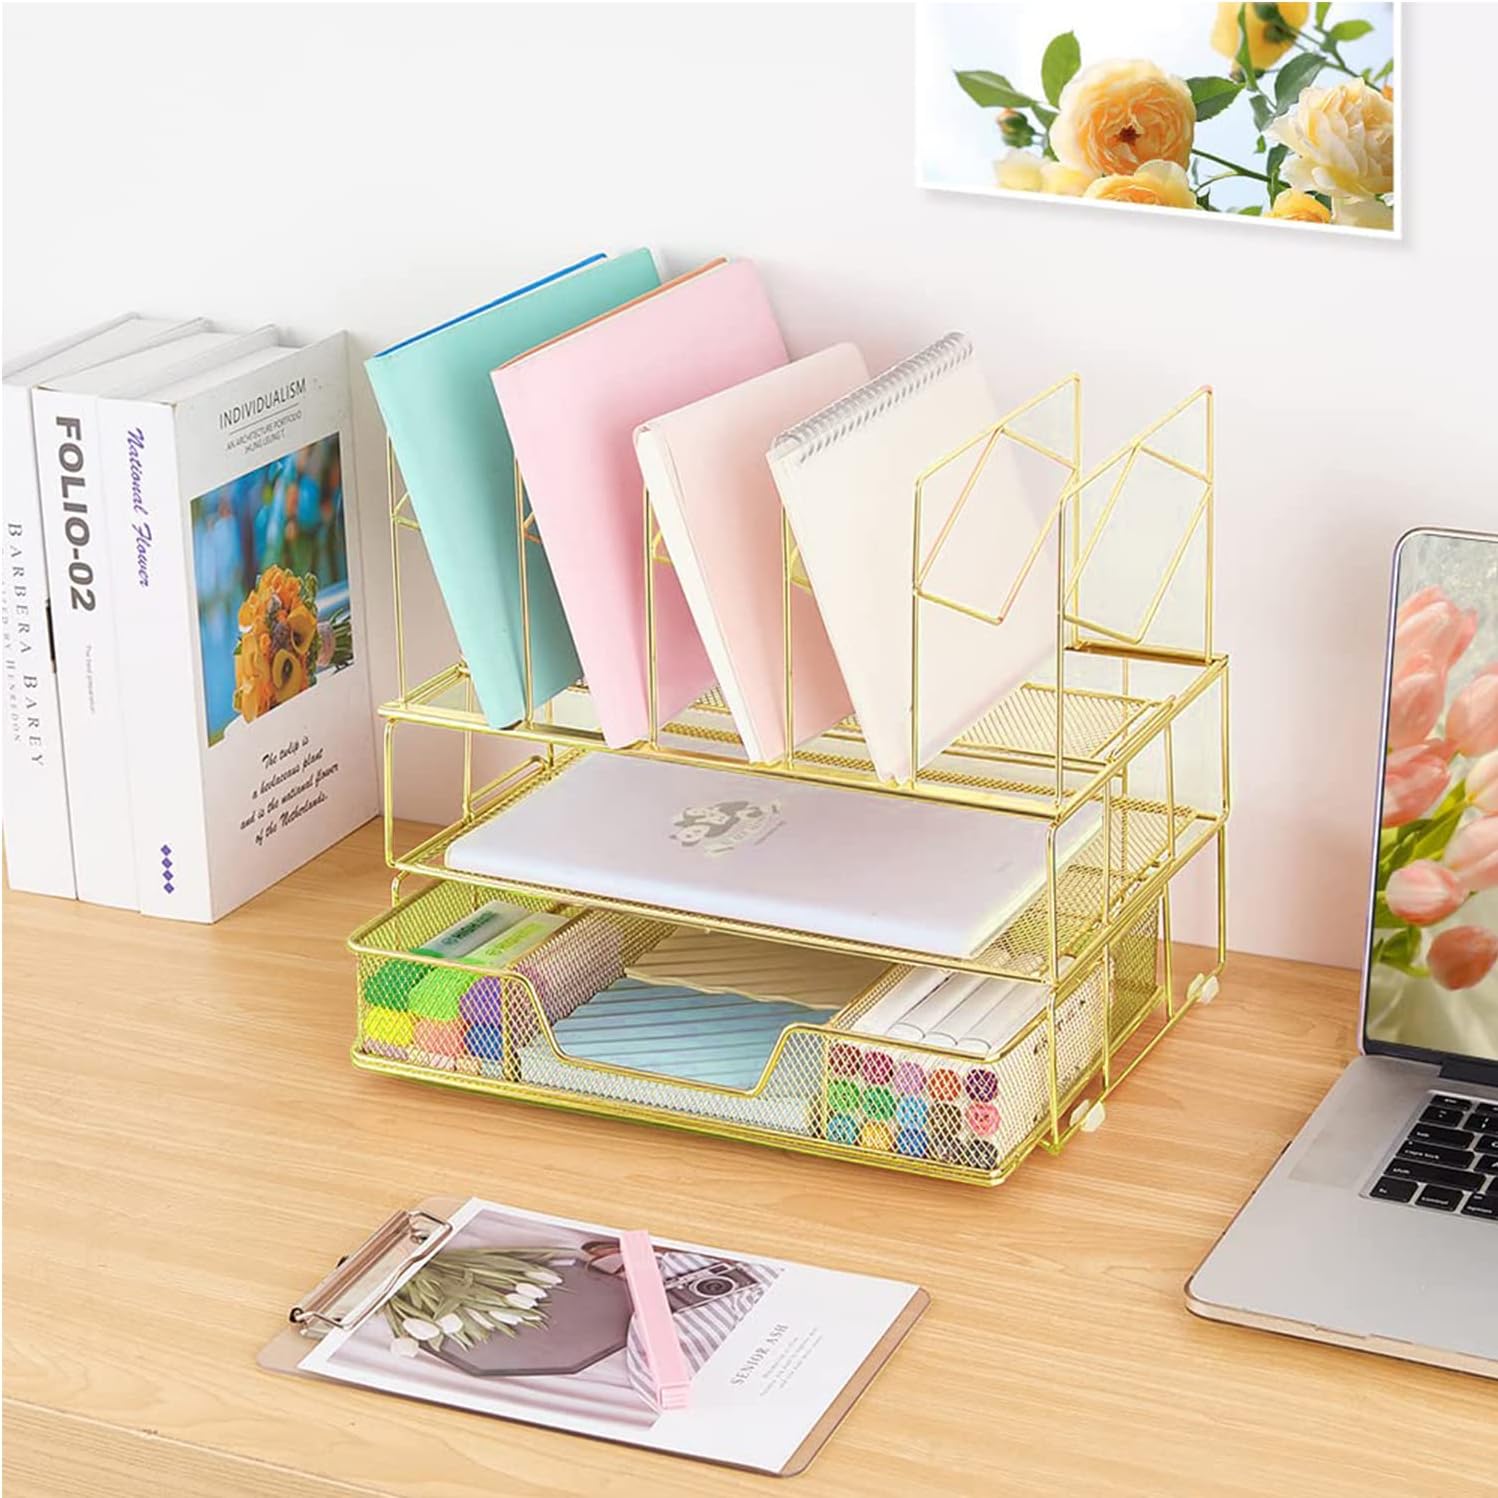 11 Best Office Organization And Storage For 2023